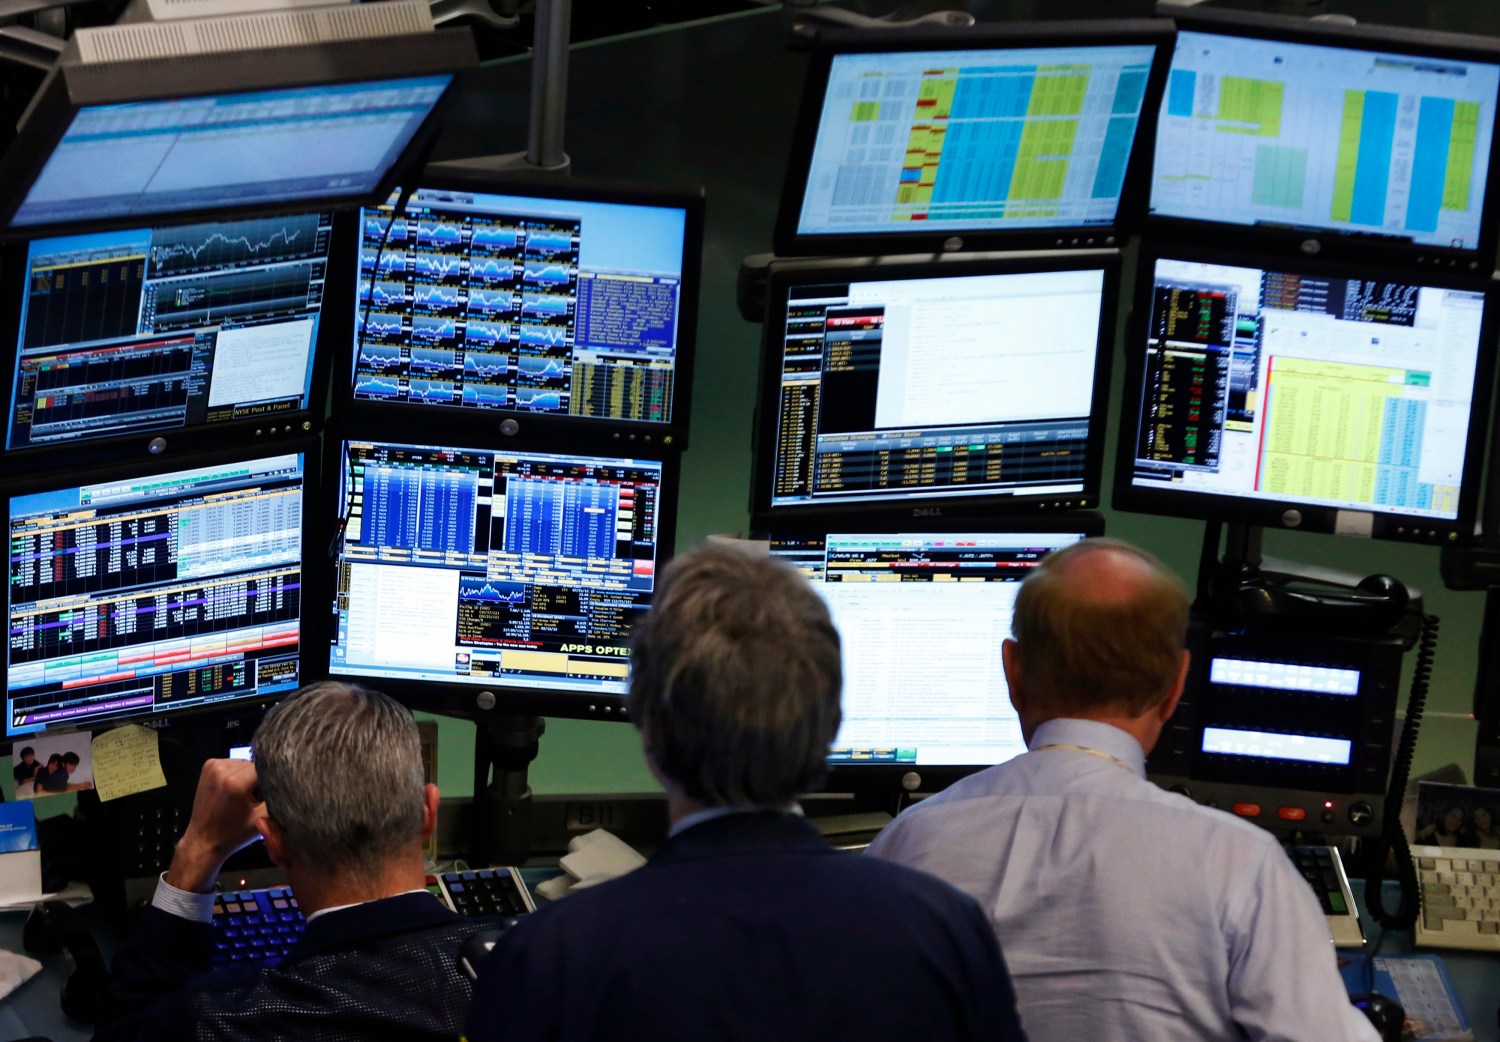 Traders work at Bloomberg terminals on the floor of the New York Stock Exchange, May 13, 2013. Bloomberg LP customers, including the U.S. Federal Reserve and the U.S. Treasury, are examining whether there could have been leaks of confidential information, even as the media company restricted its reporters' access to client data and created a position to oversee compliance in a bid to assuage privacy concerns. Bloomberg has more than 315,000 terminal subscribers globally, with each Bloomberg terminal costing more than $20,000 a year. REUTERS/Brendan McDermid (UNITED STATES  - Tags: BUSINESS MEDIA) - GM1E95E0EJ701